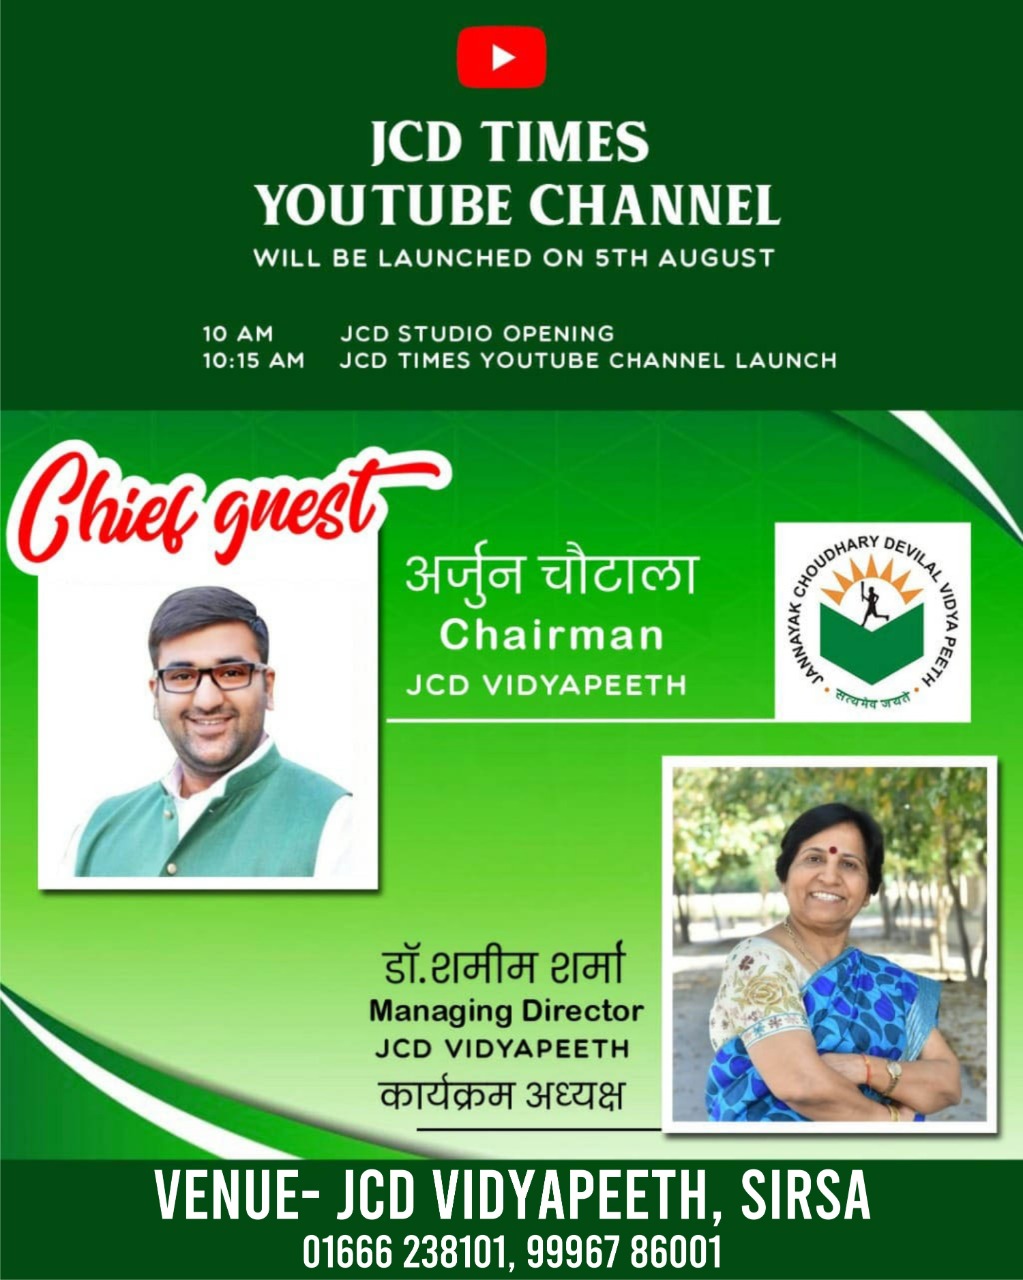 JCD Times YouTube Channel launching on 5th August